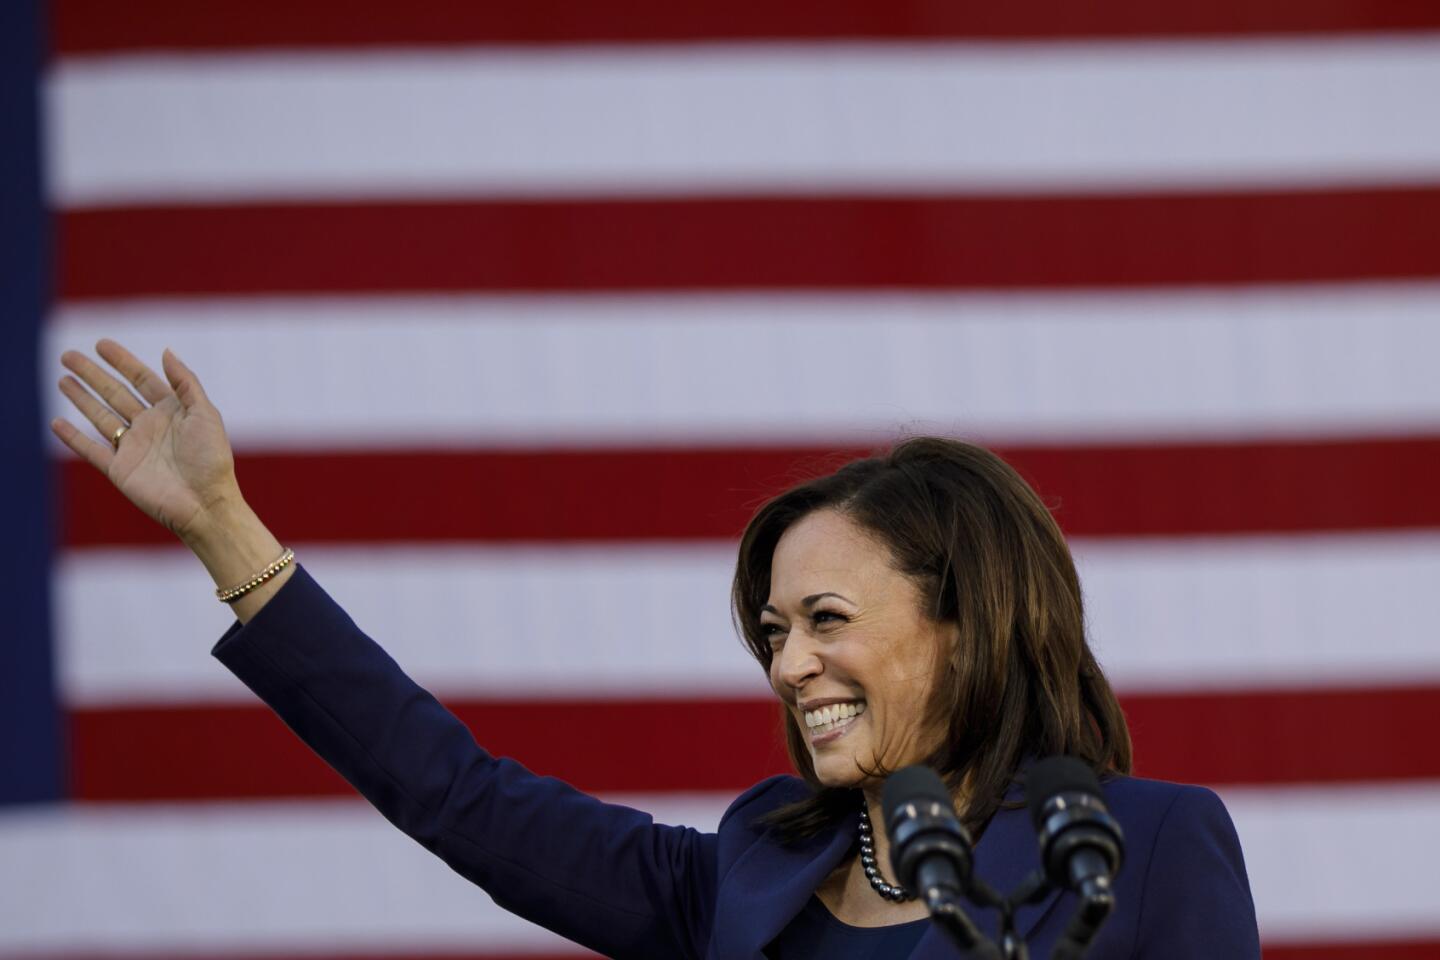 Sen. Kamala Harris launches her presidential campaign in her hometown of Oakland in January 2019.